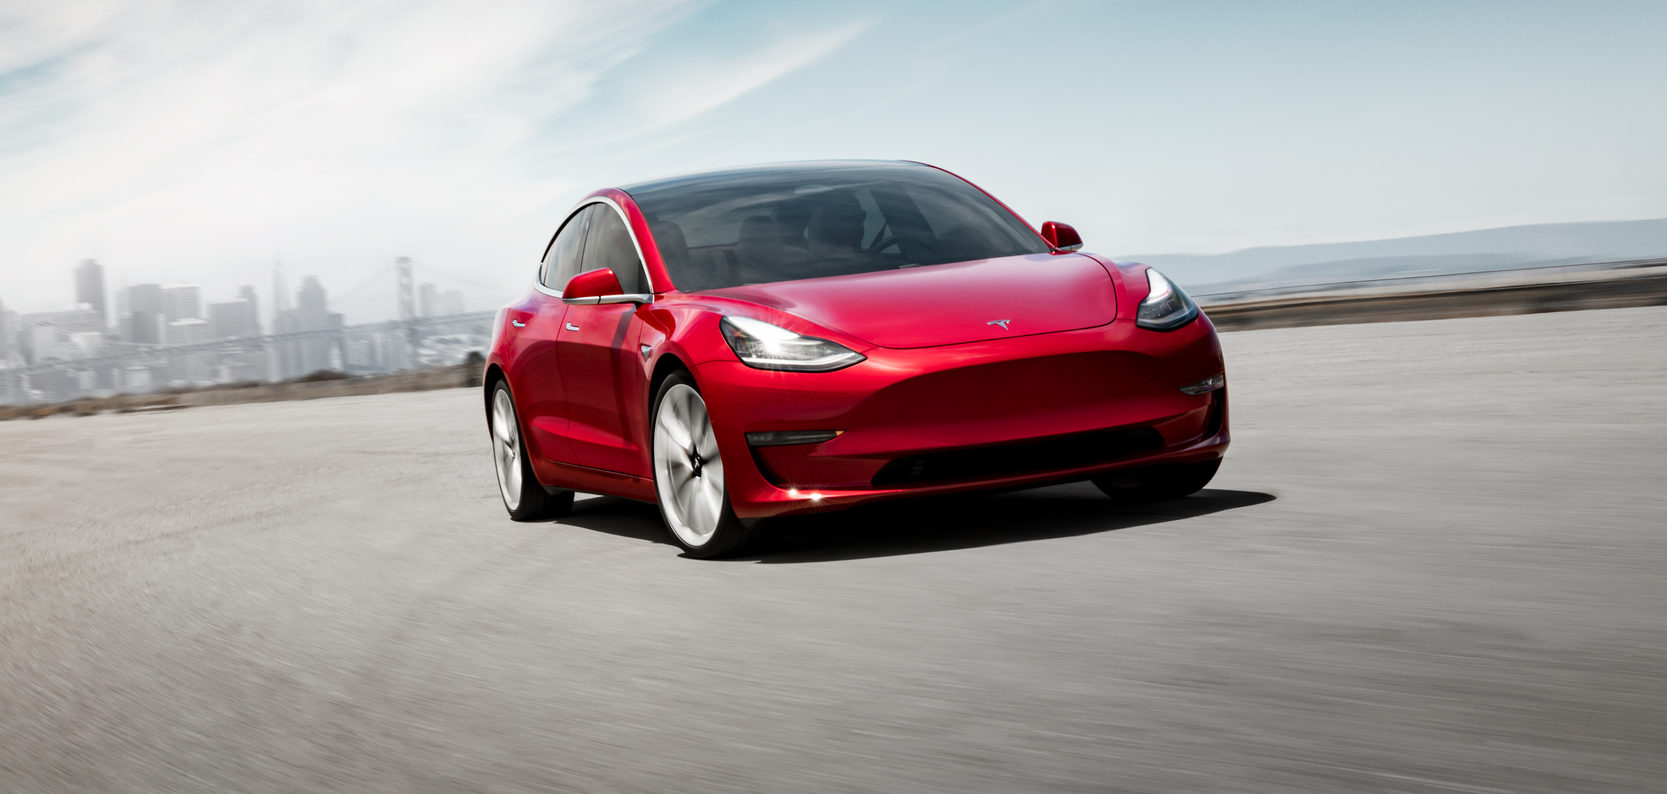 Sorry Jim Chanos, but the Tesla Model 3 is definitely not ‘looking to be a lemon’